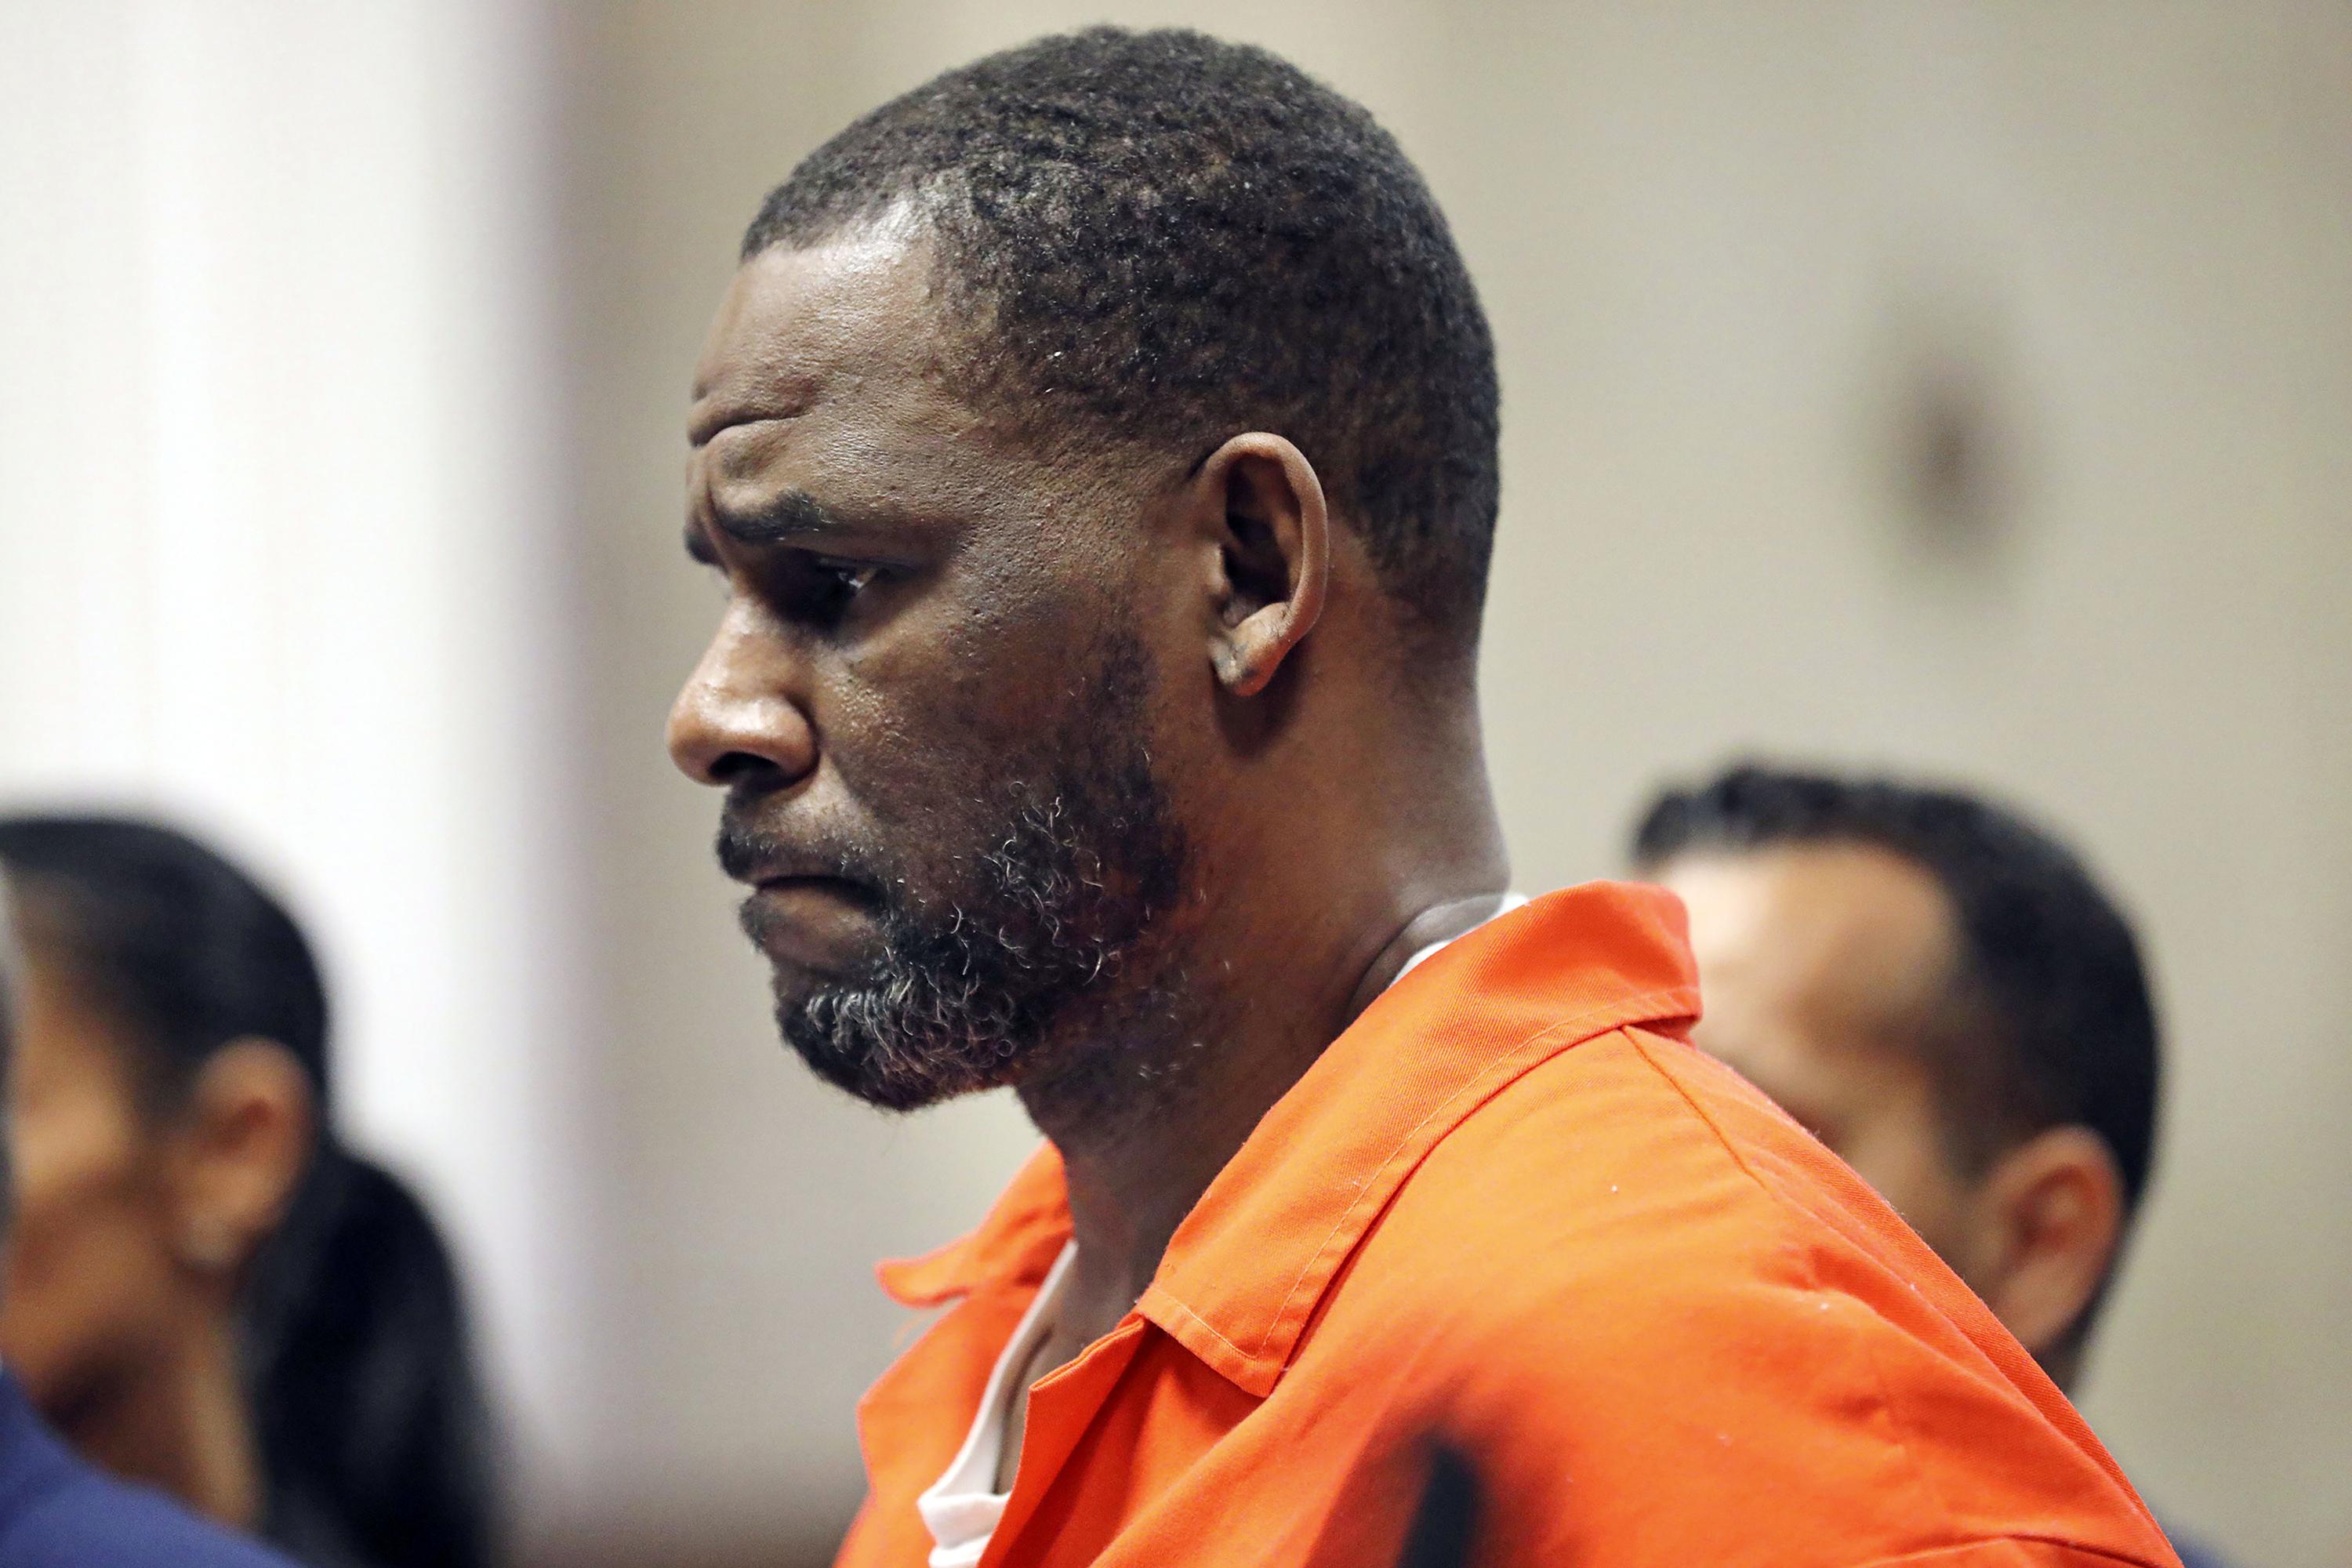 Feds: R. Kelly remains on suicide watch 'for his own safety'